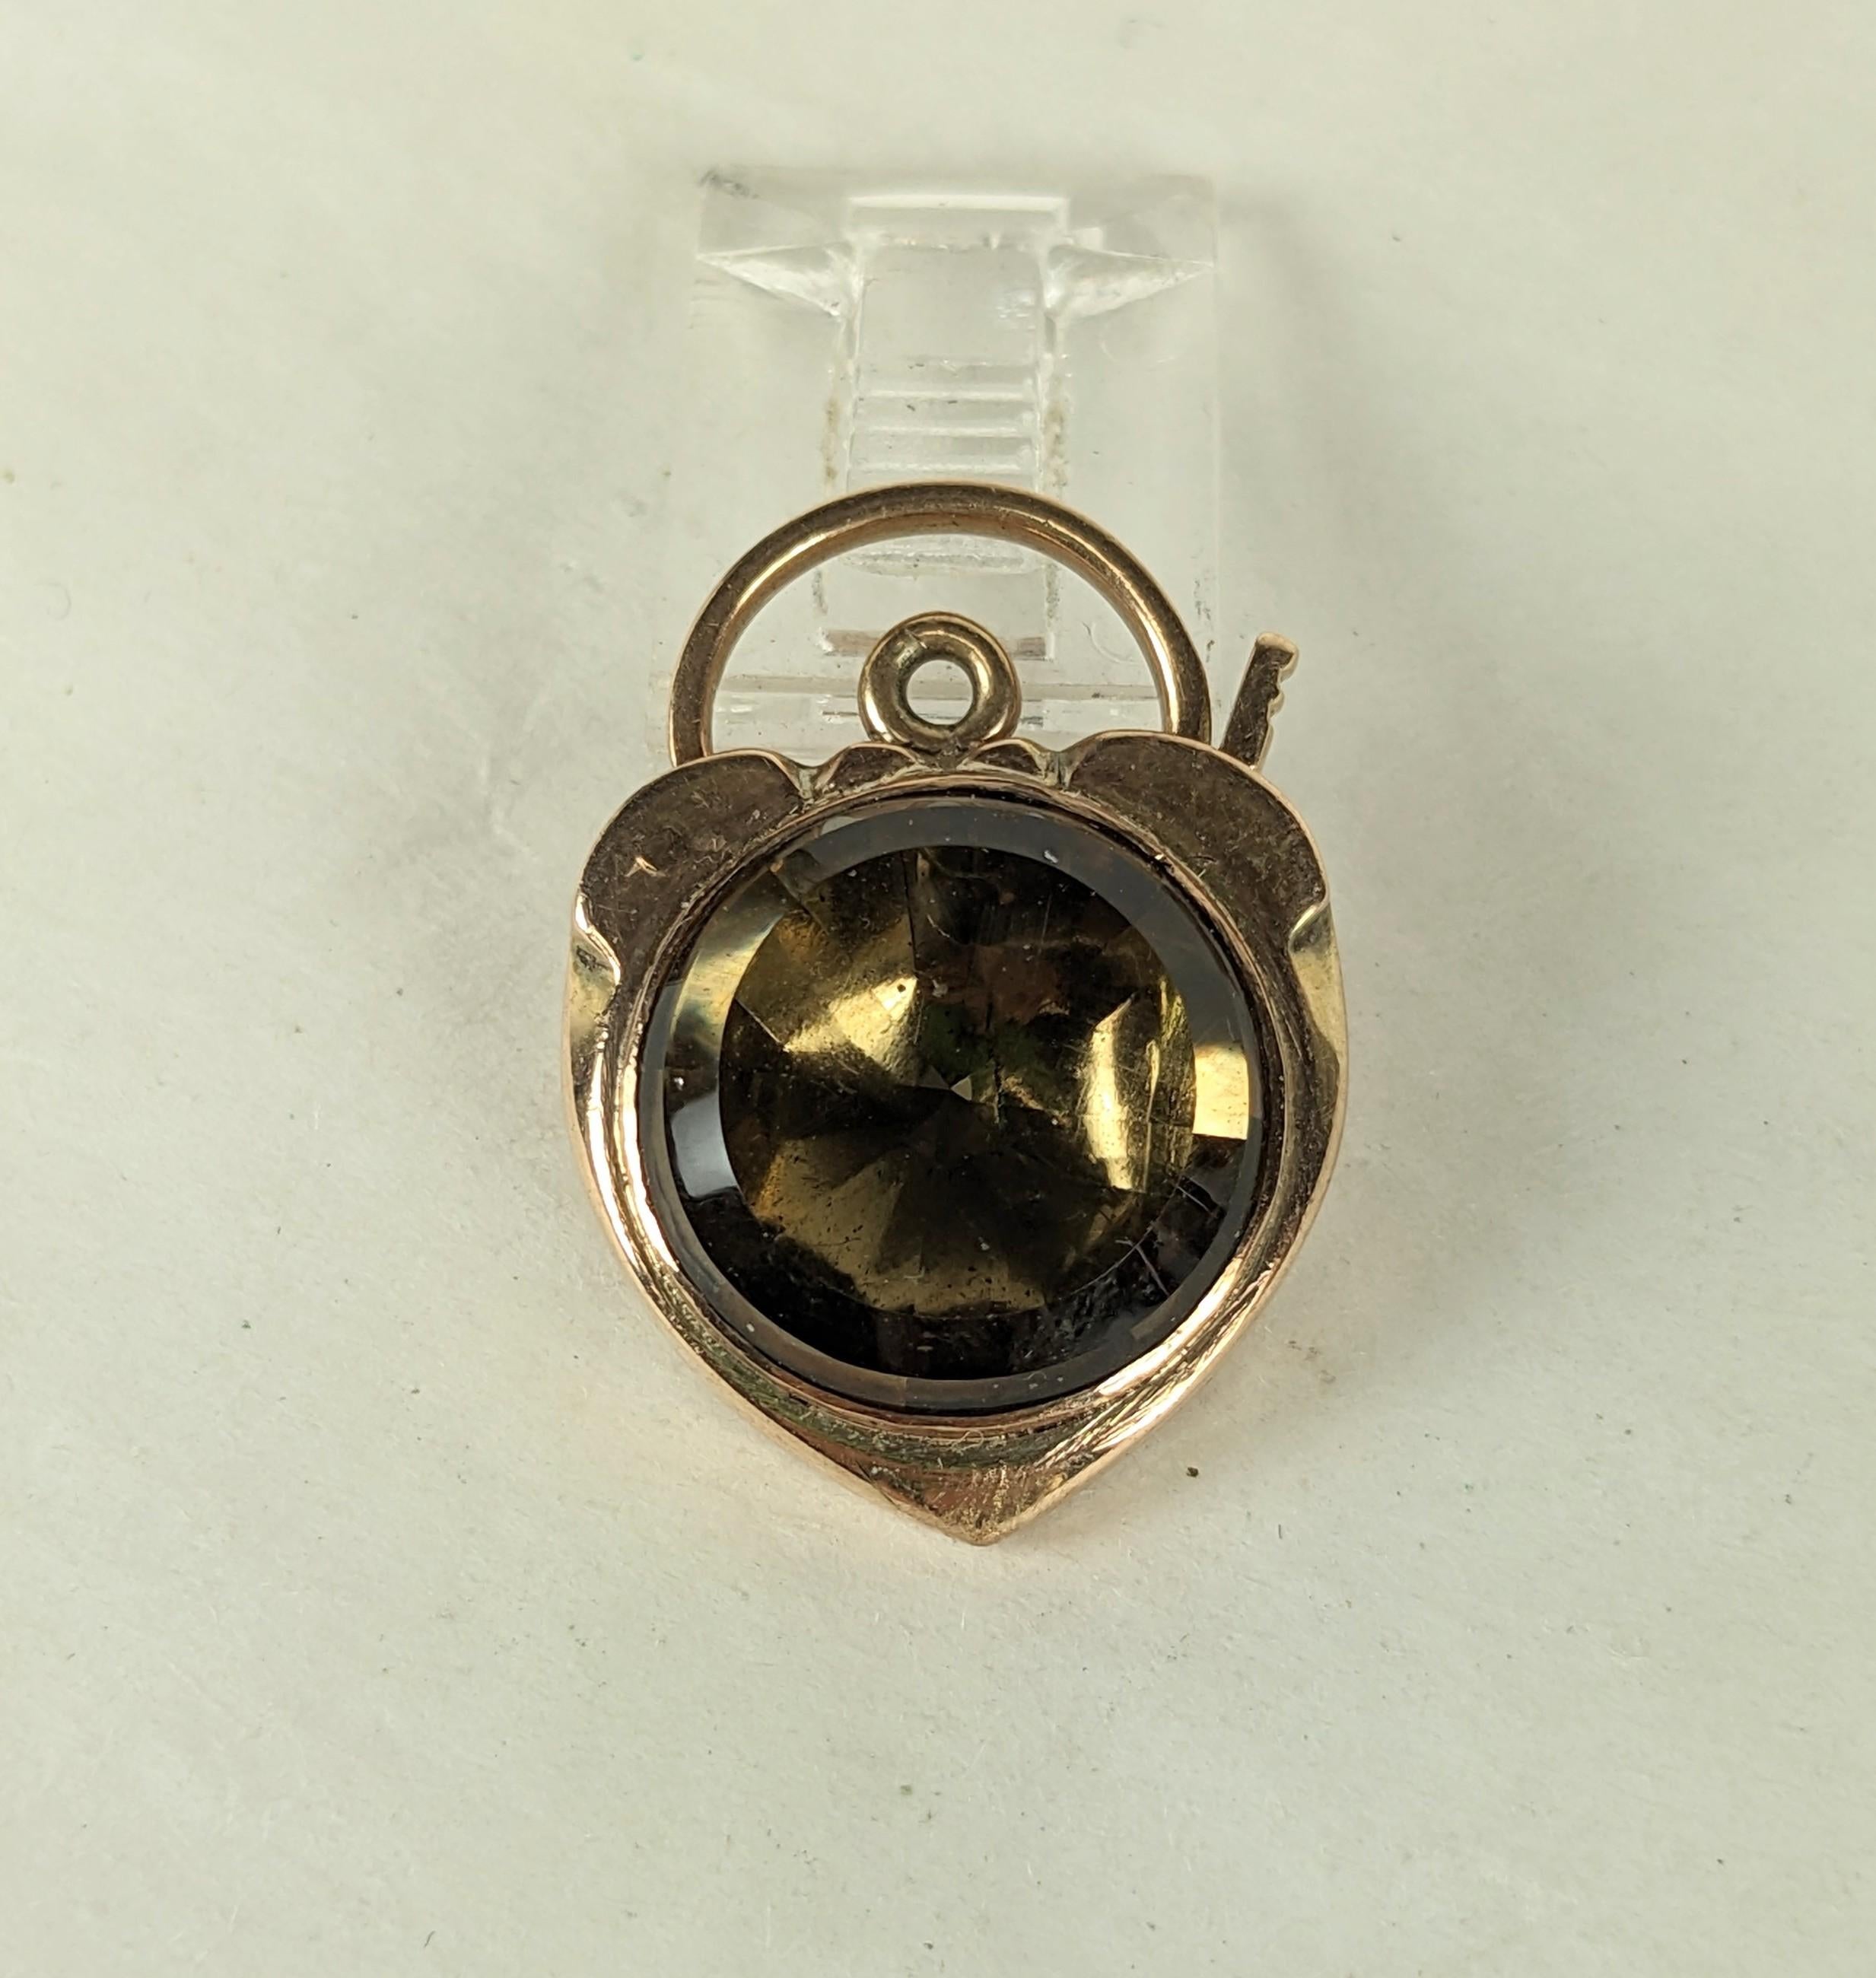 Early Victorian Foiled Gemstone Padlock in 14k gold. Flat cut citrine or topaz set in foil back setting. Heavy gold setting with working padlock for use as clasp. 1